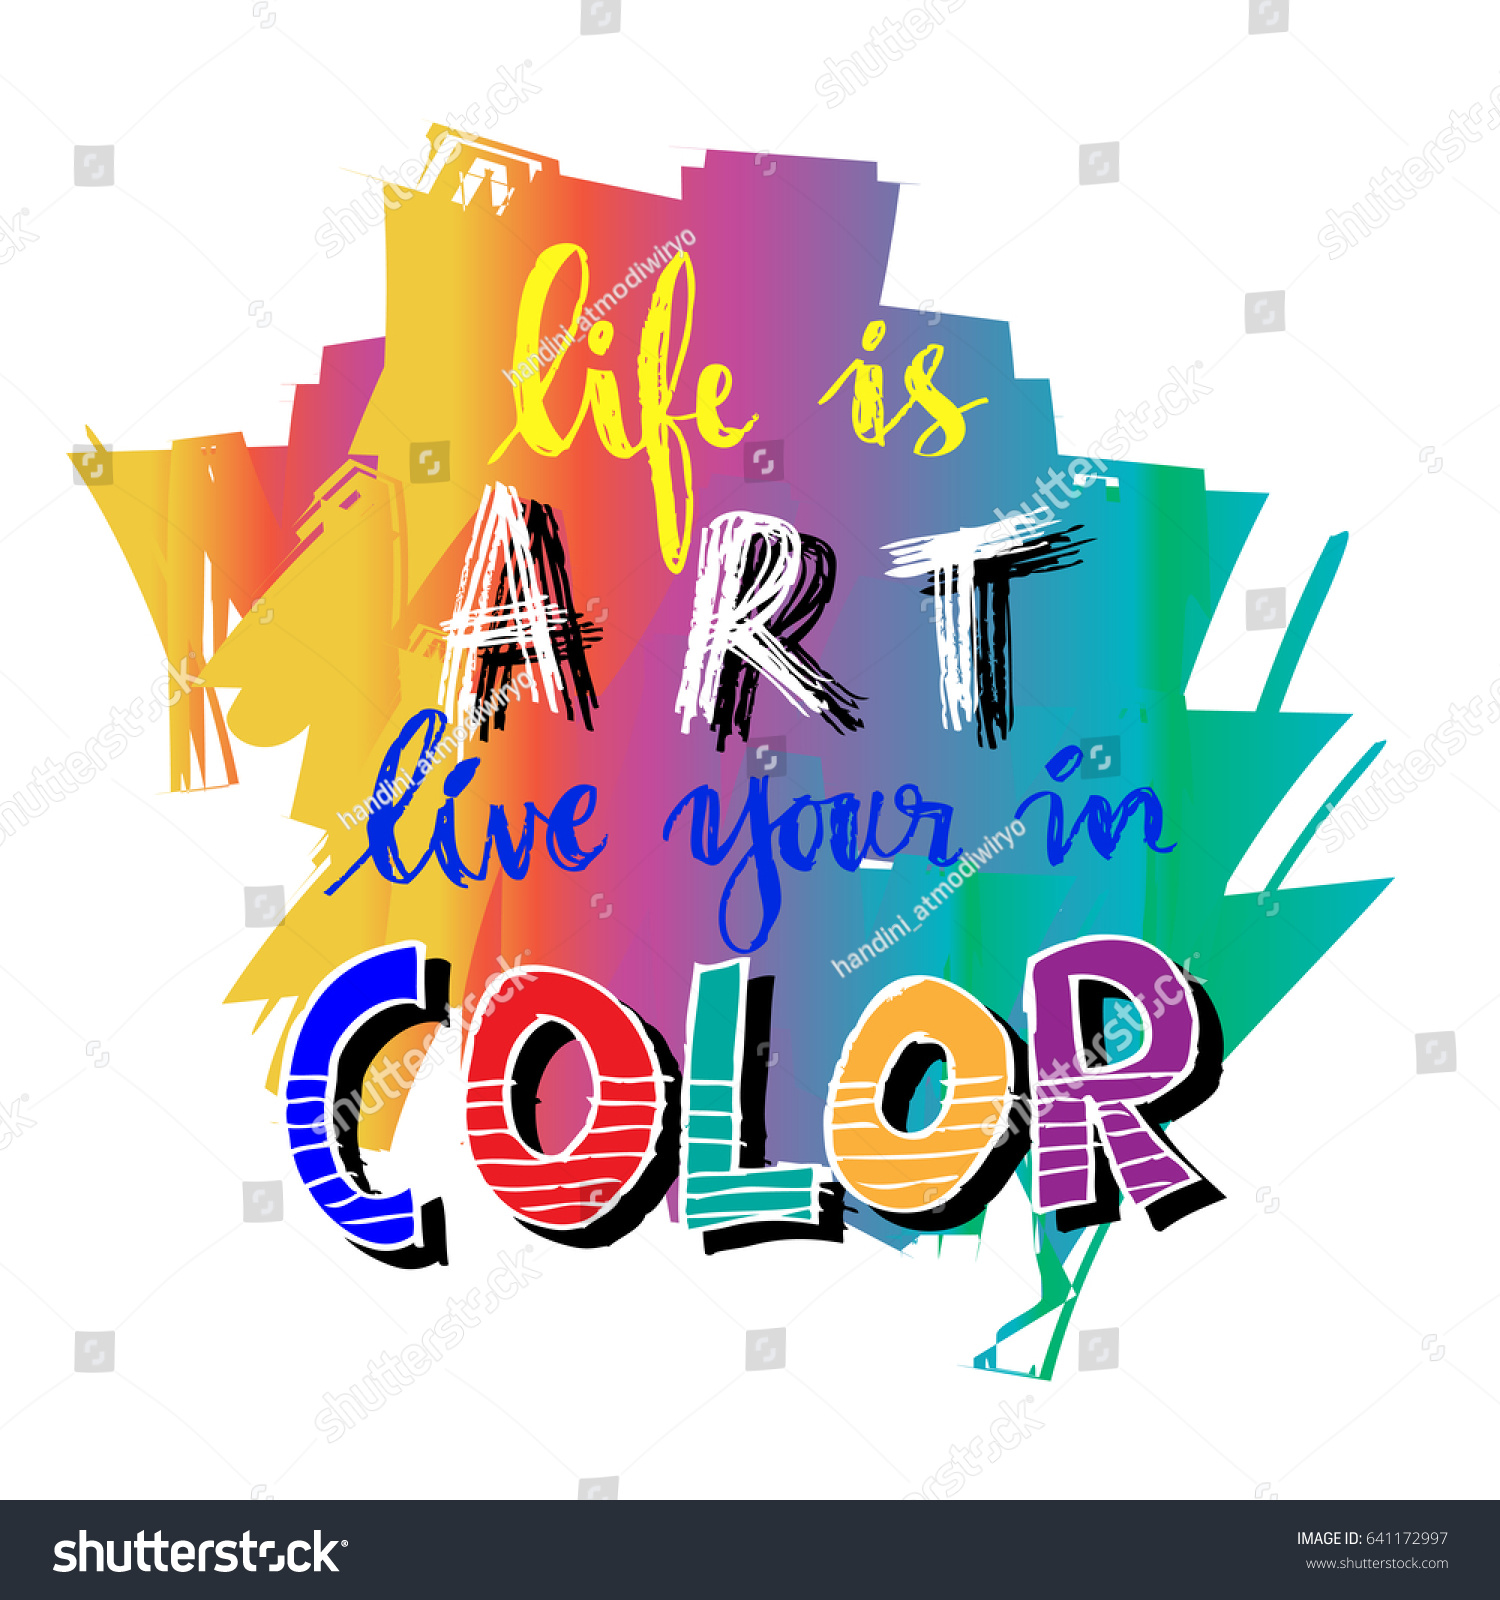 Life is art live your in color Hand lettering calligraphy Inspirational quotes